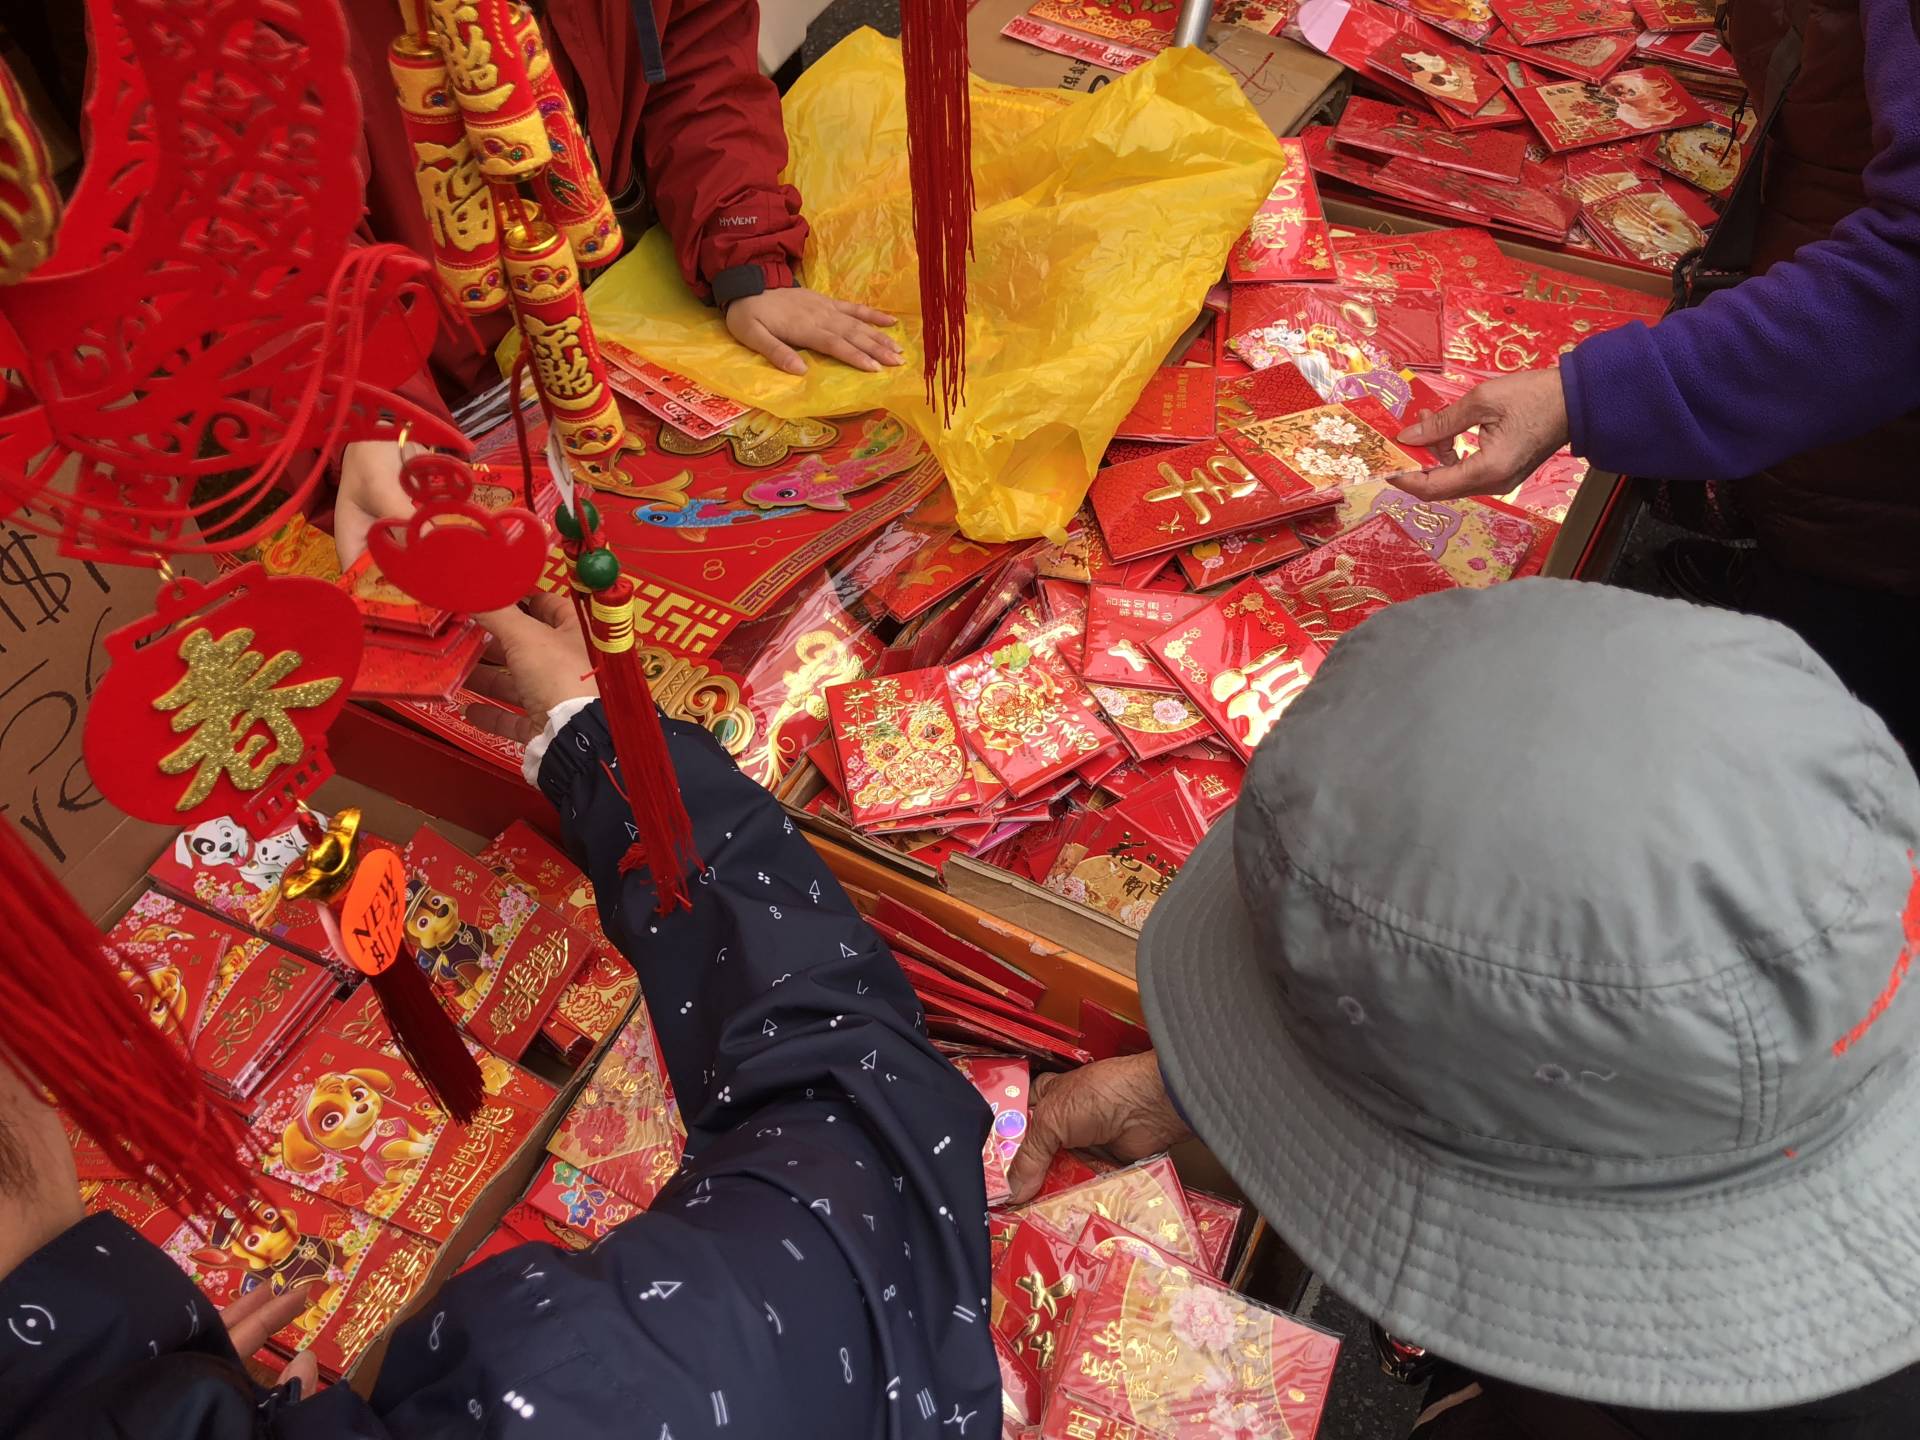 Elderly ladies pick over red envelopes at the Chinese New Year Flower Market Fair. The market is held before Chinese New Year proper in order for people to buy flowers, fruit, candy and plants before the new lunar year. Alyssa Jeong Perry/KQED